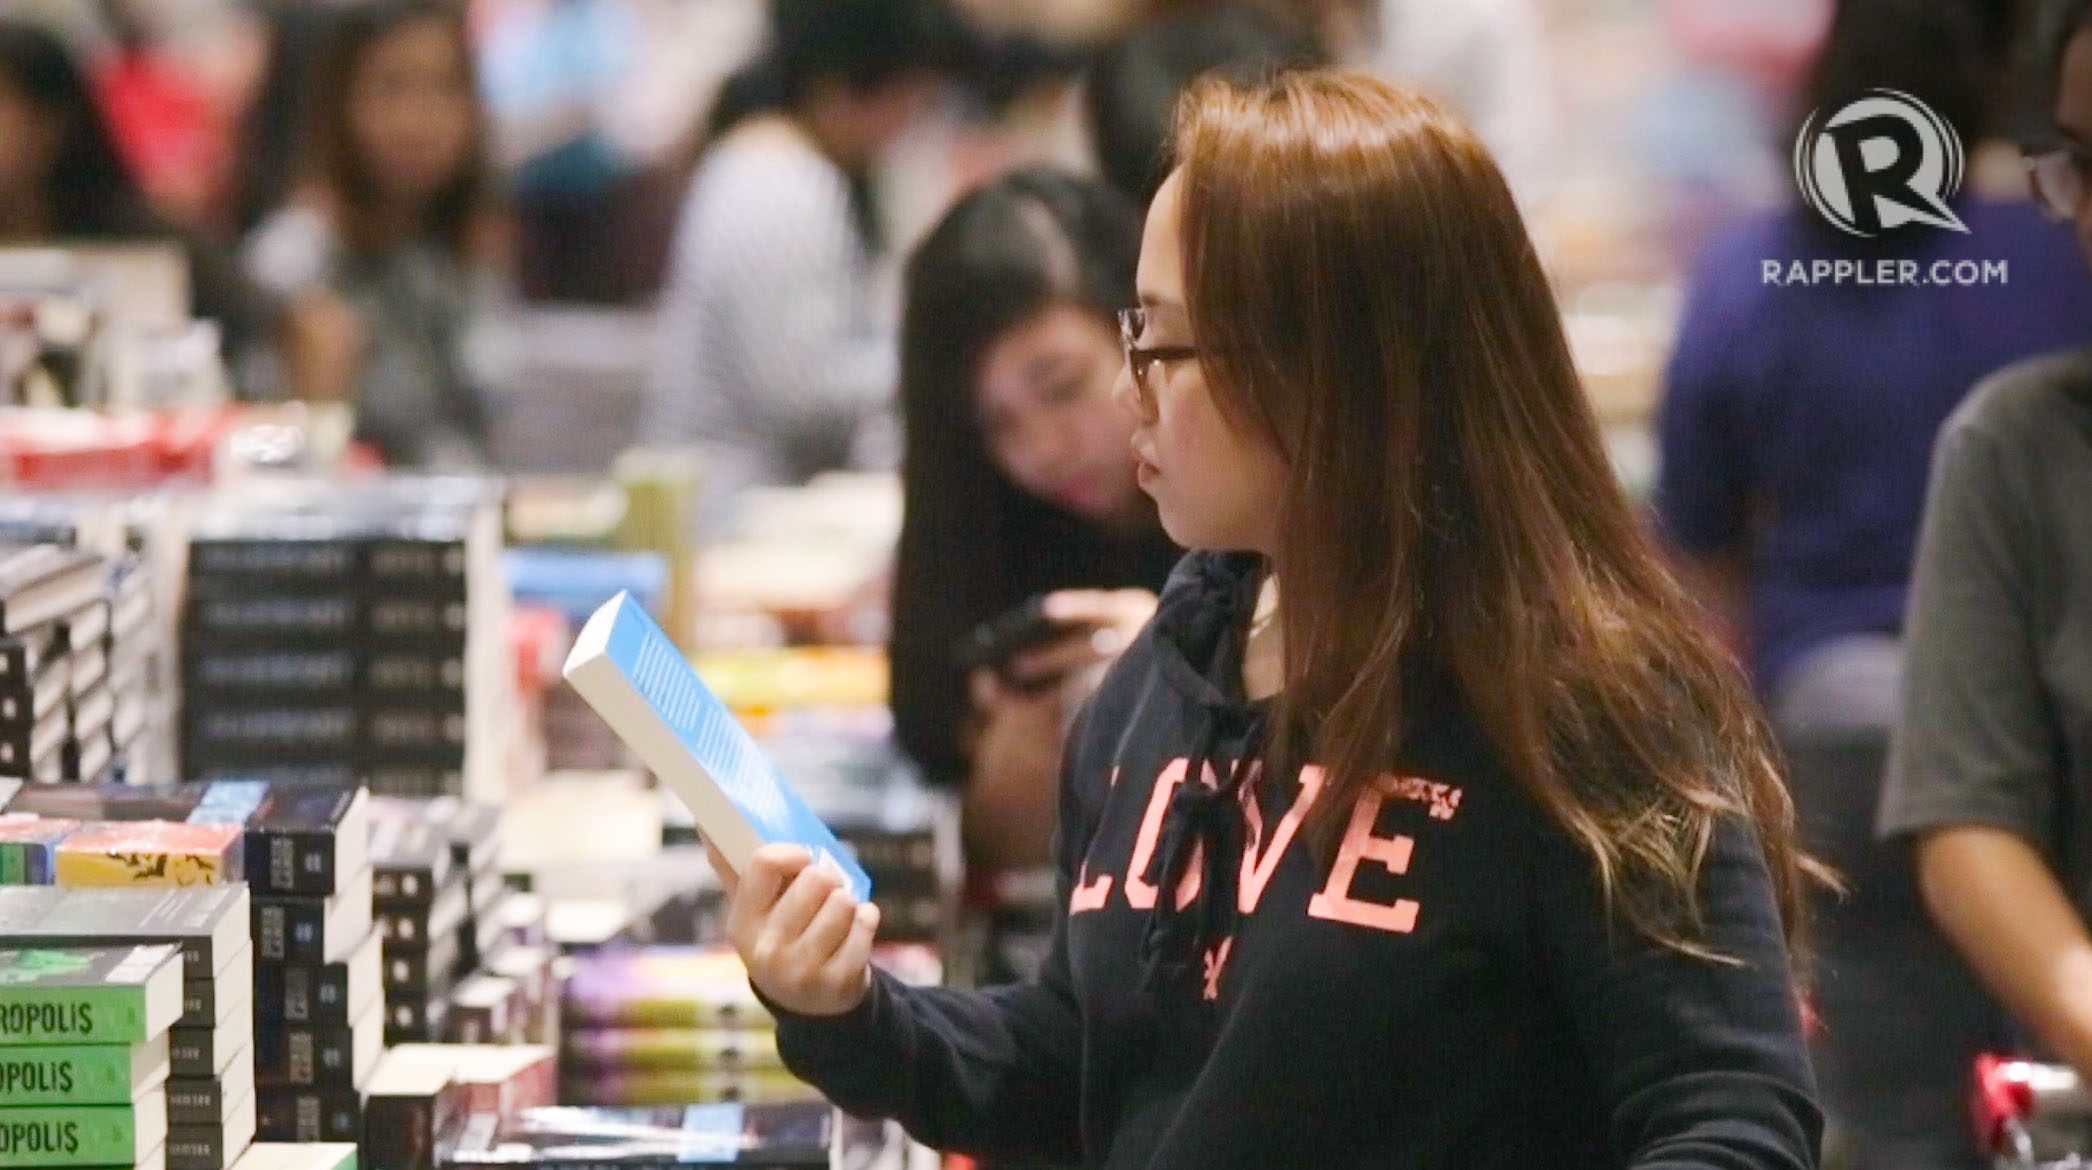 WATCH: Big Bad Wolf Book Sale opens in the Philippines